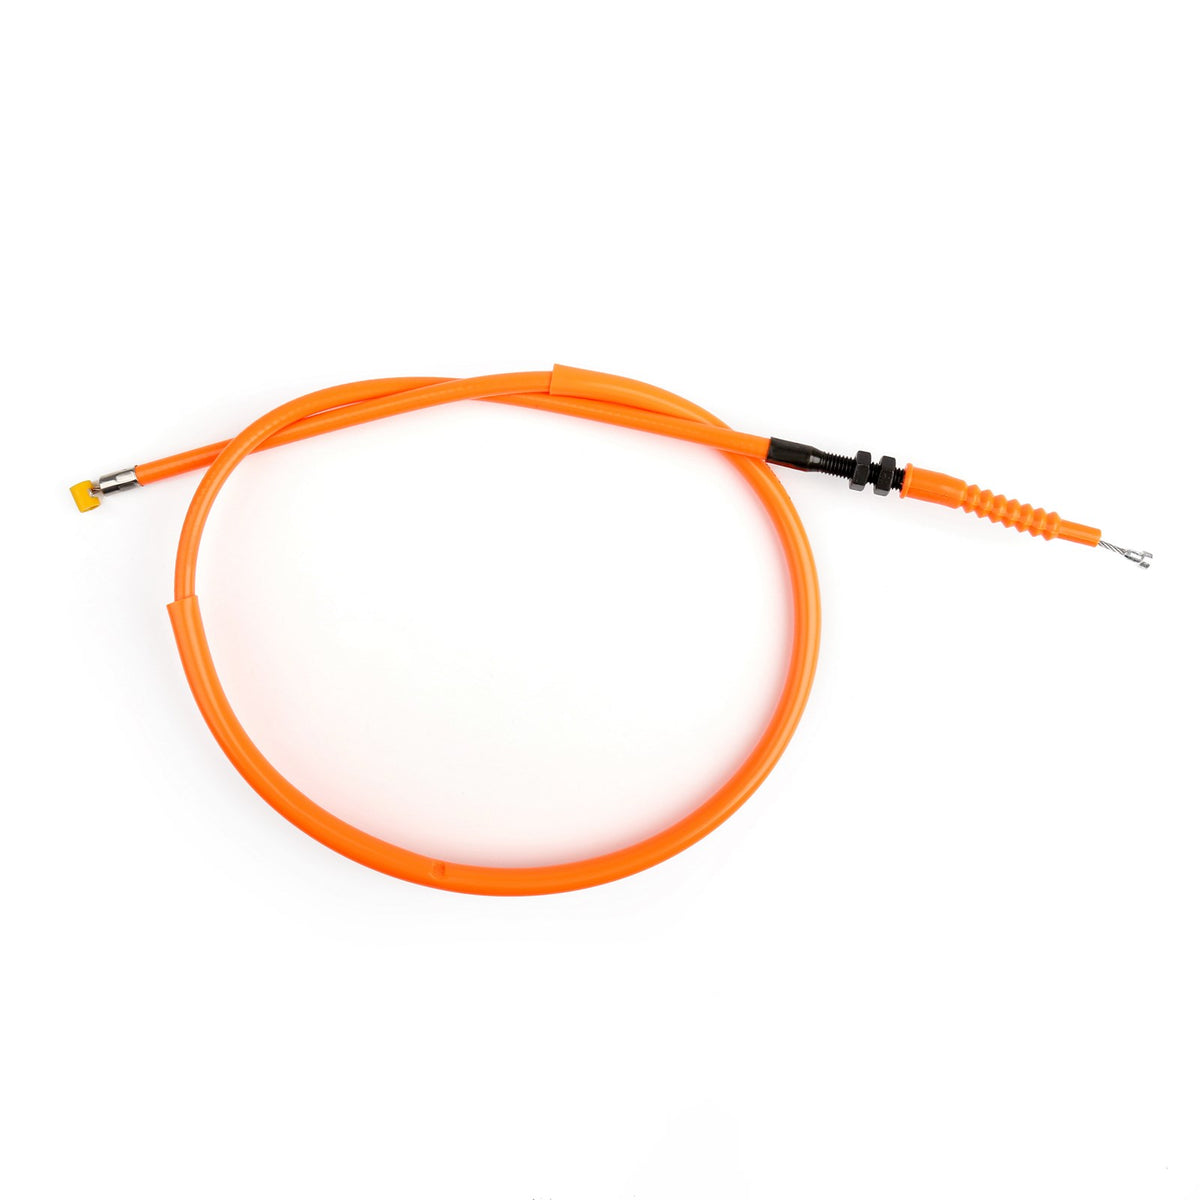 Clutch Cable Wire Replacement Fit For Honda CBR600RR 2003-2006 2004 Orange